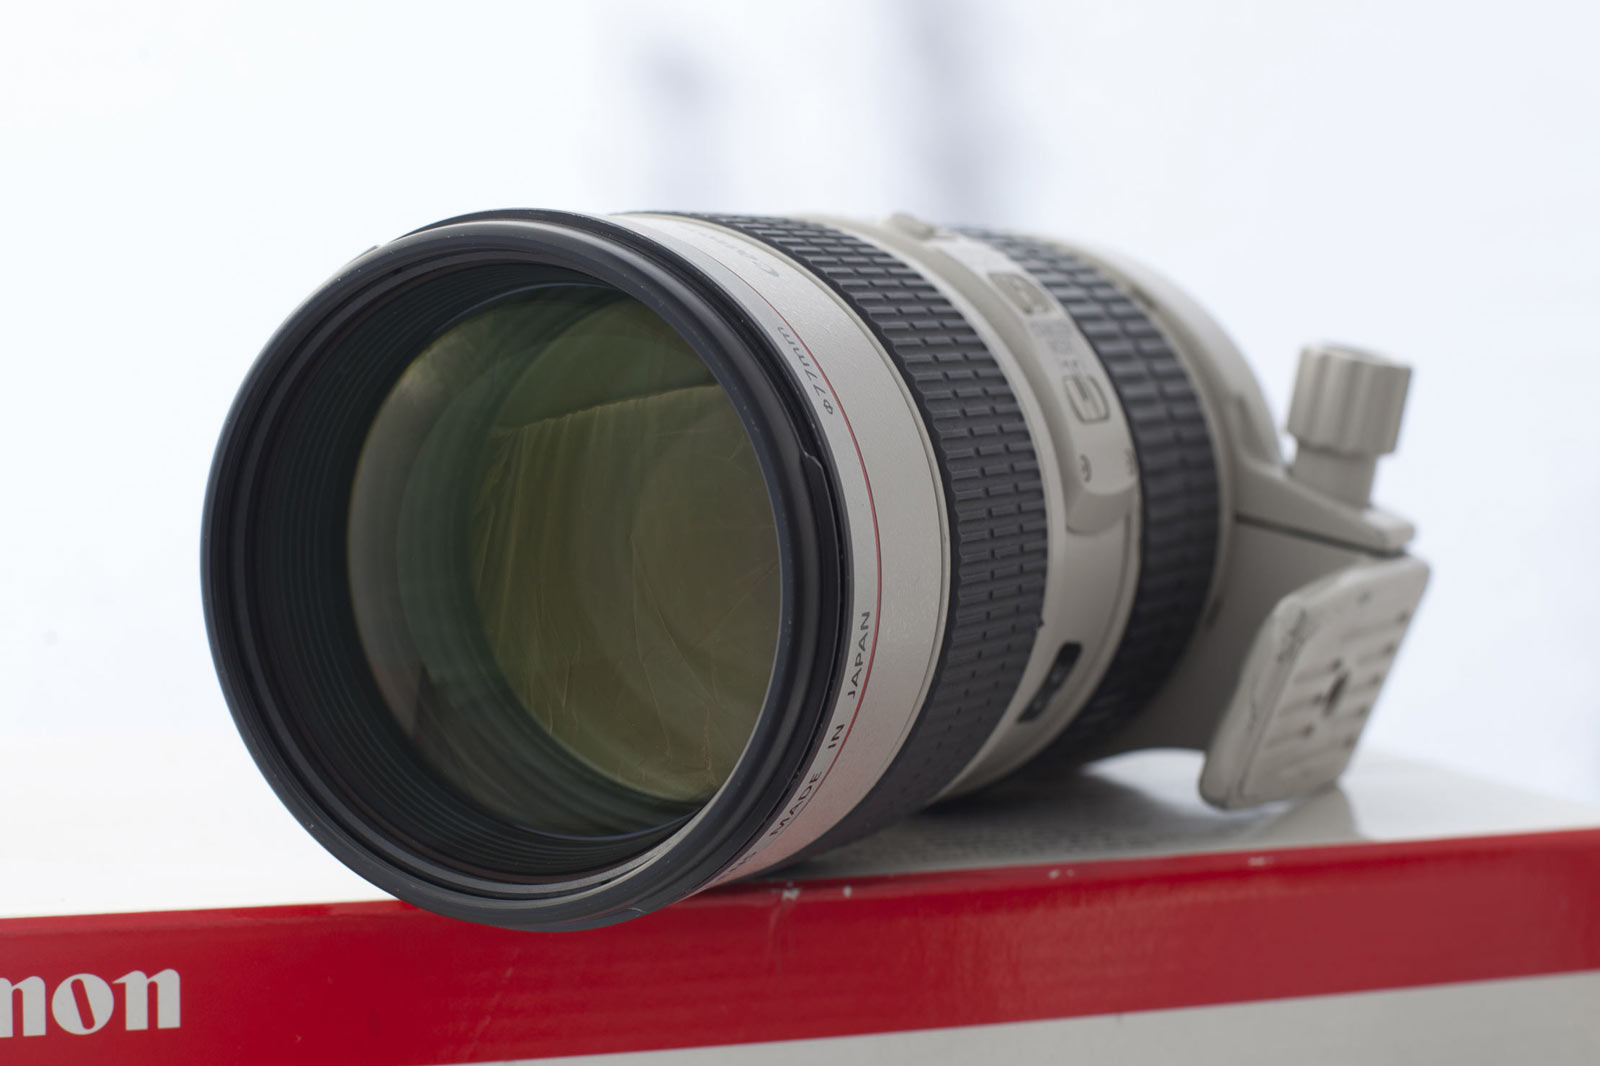 Canon EF 70-200 IS USM f/2.8L